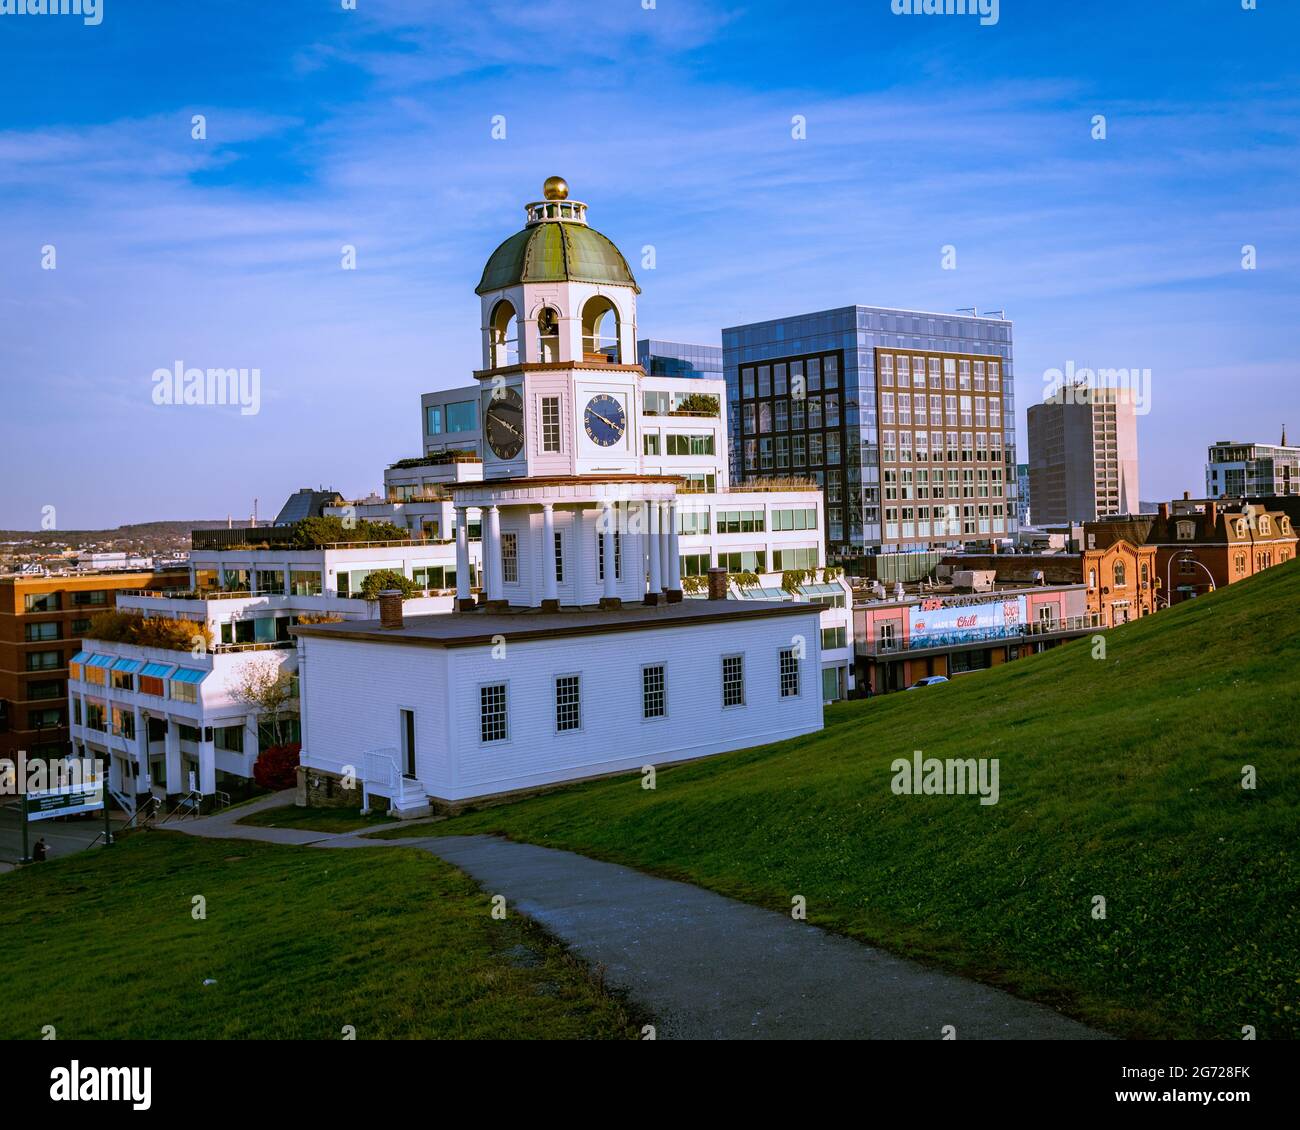 the halifax town clock over lookin the city from a hill side Stock Photo